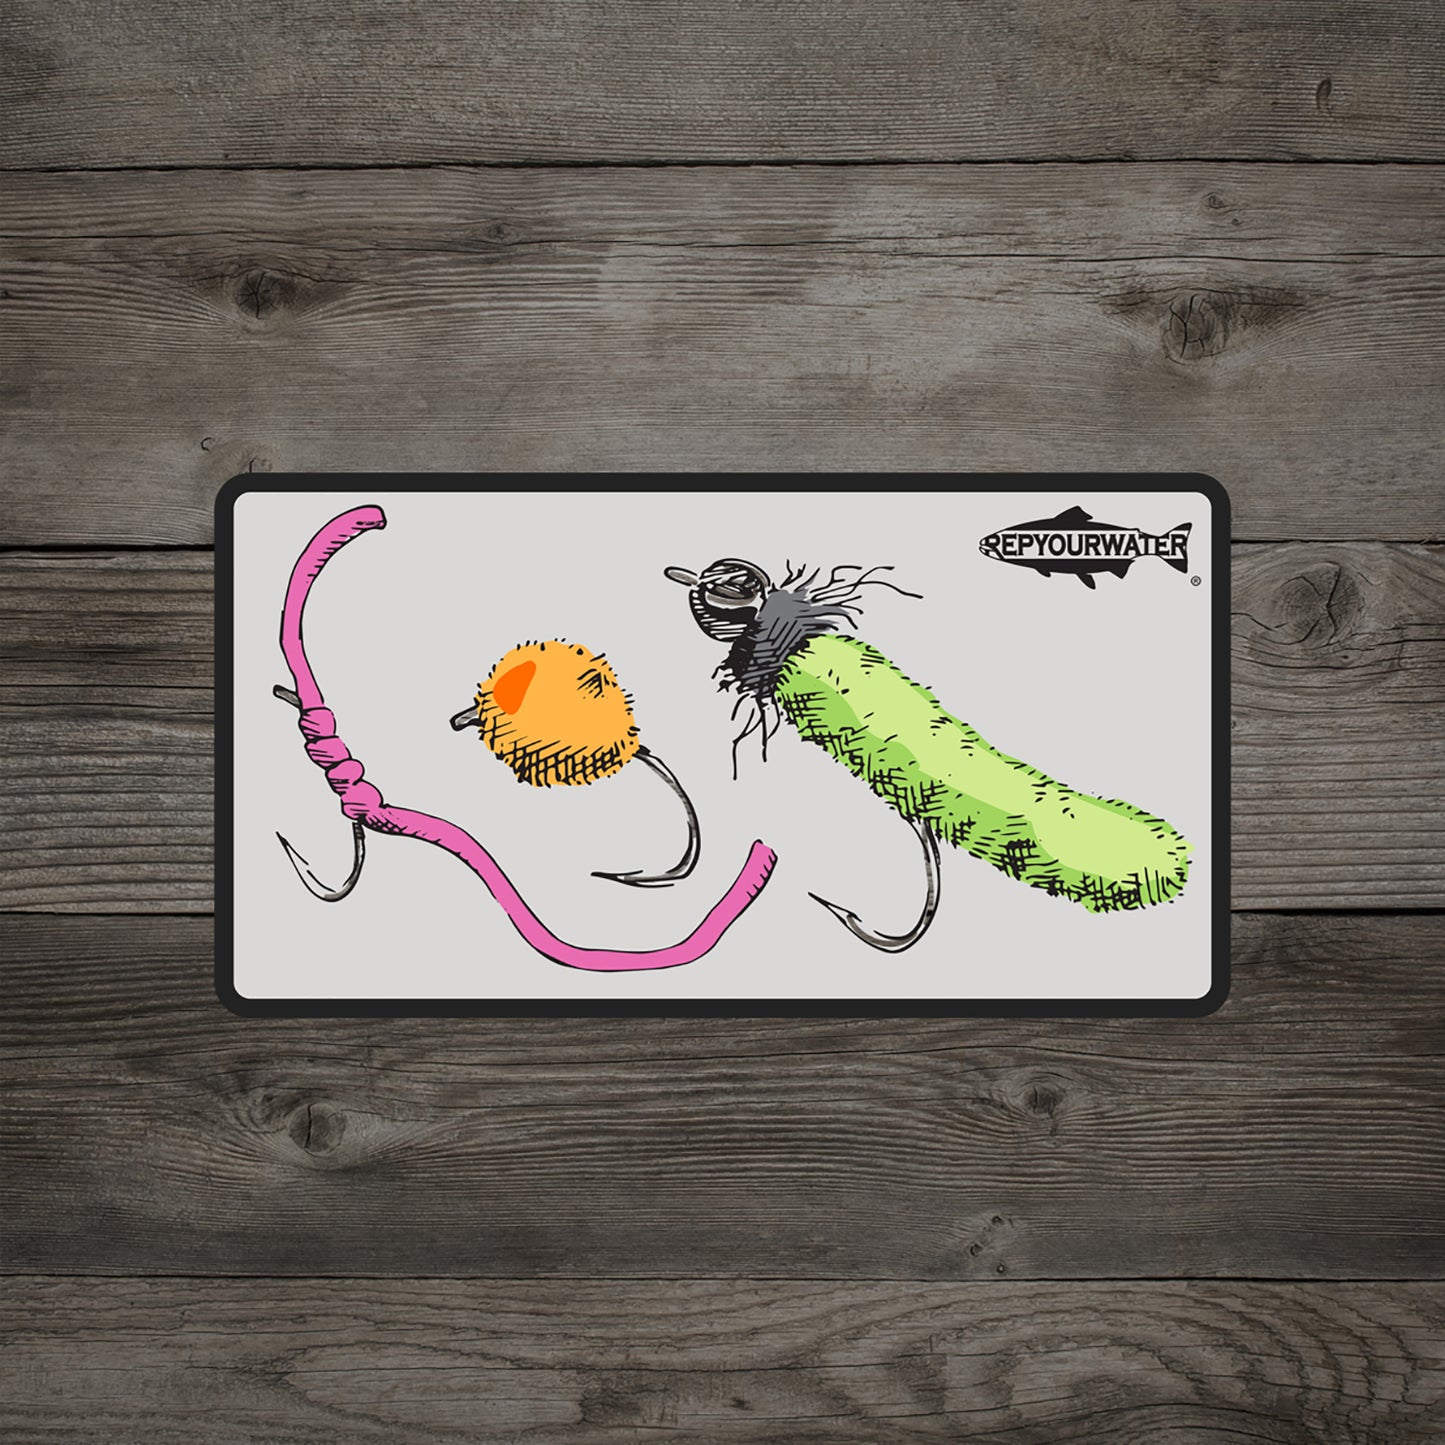 A wood background has a sticker on it featuring a worm fly egg fly and mop fly with a trout silhouette in the top right coner that reads rep your water